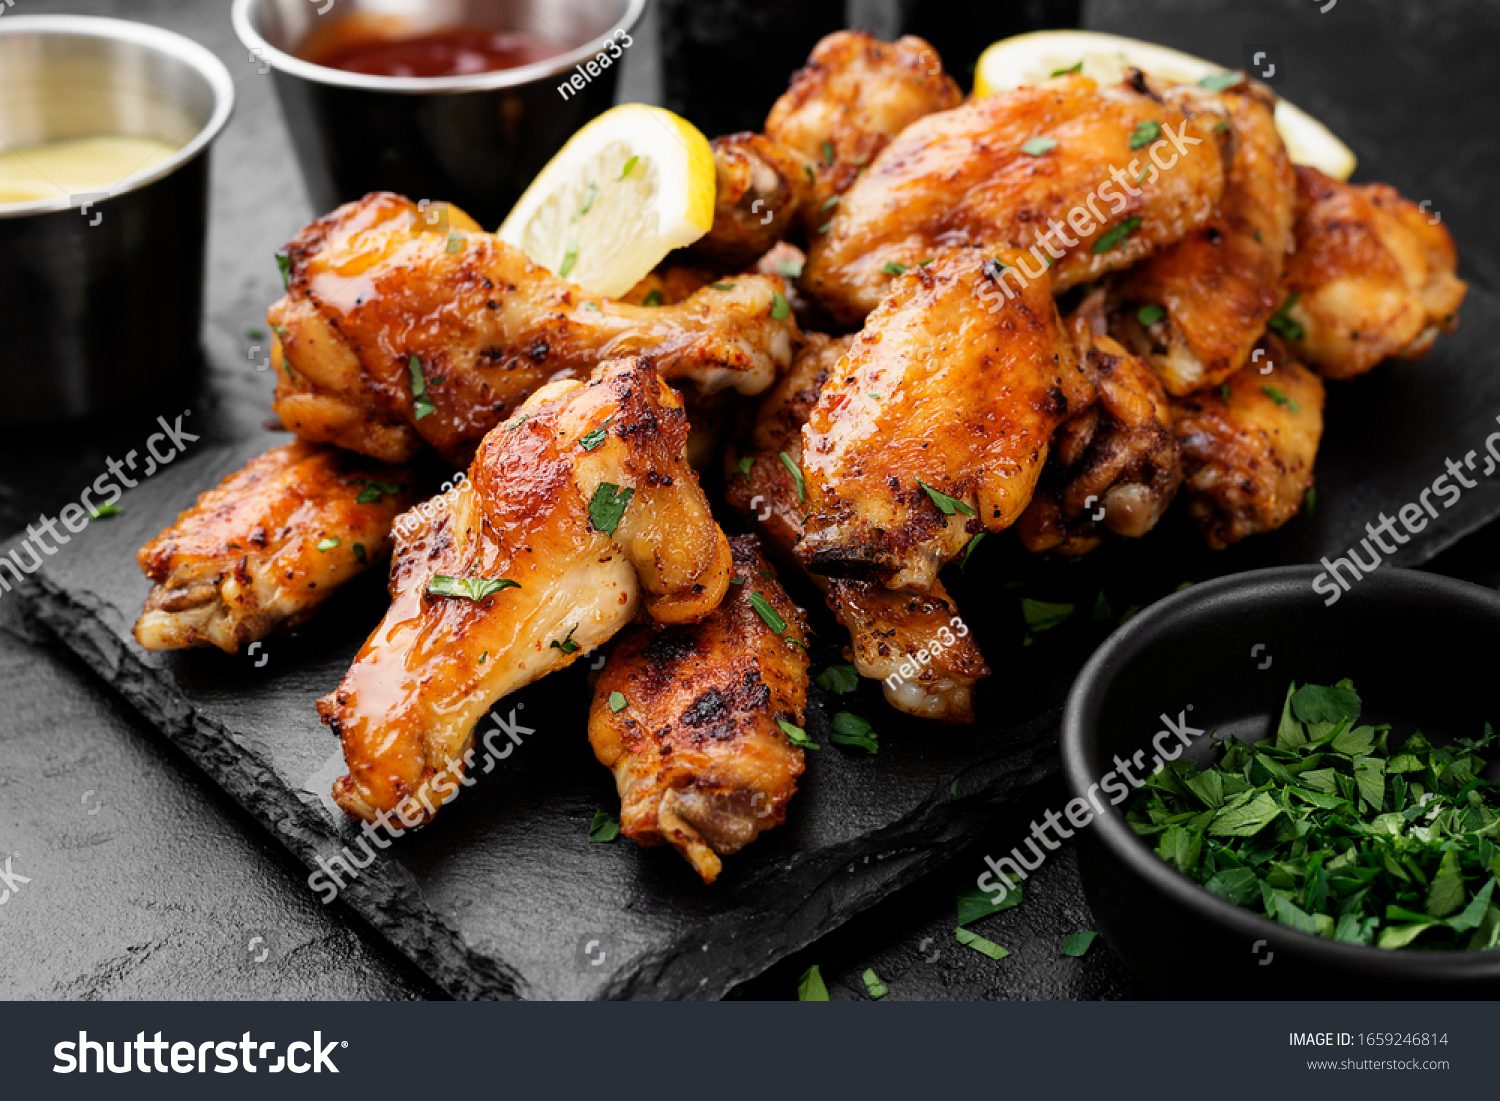 Baked chicken wings served with different sauces and lemon. Black background #1659246814